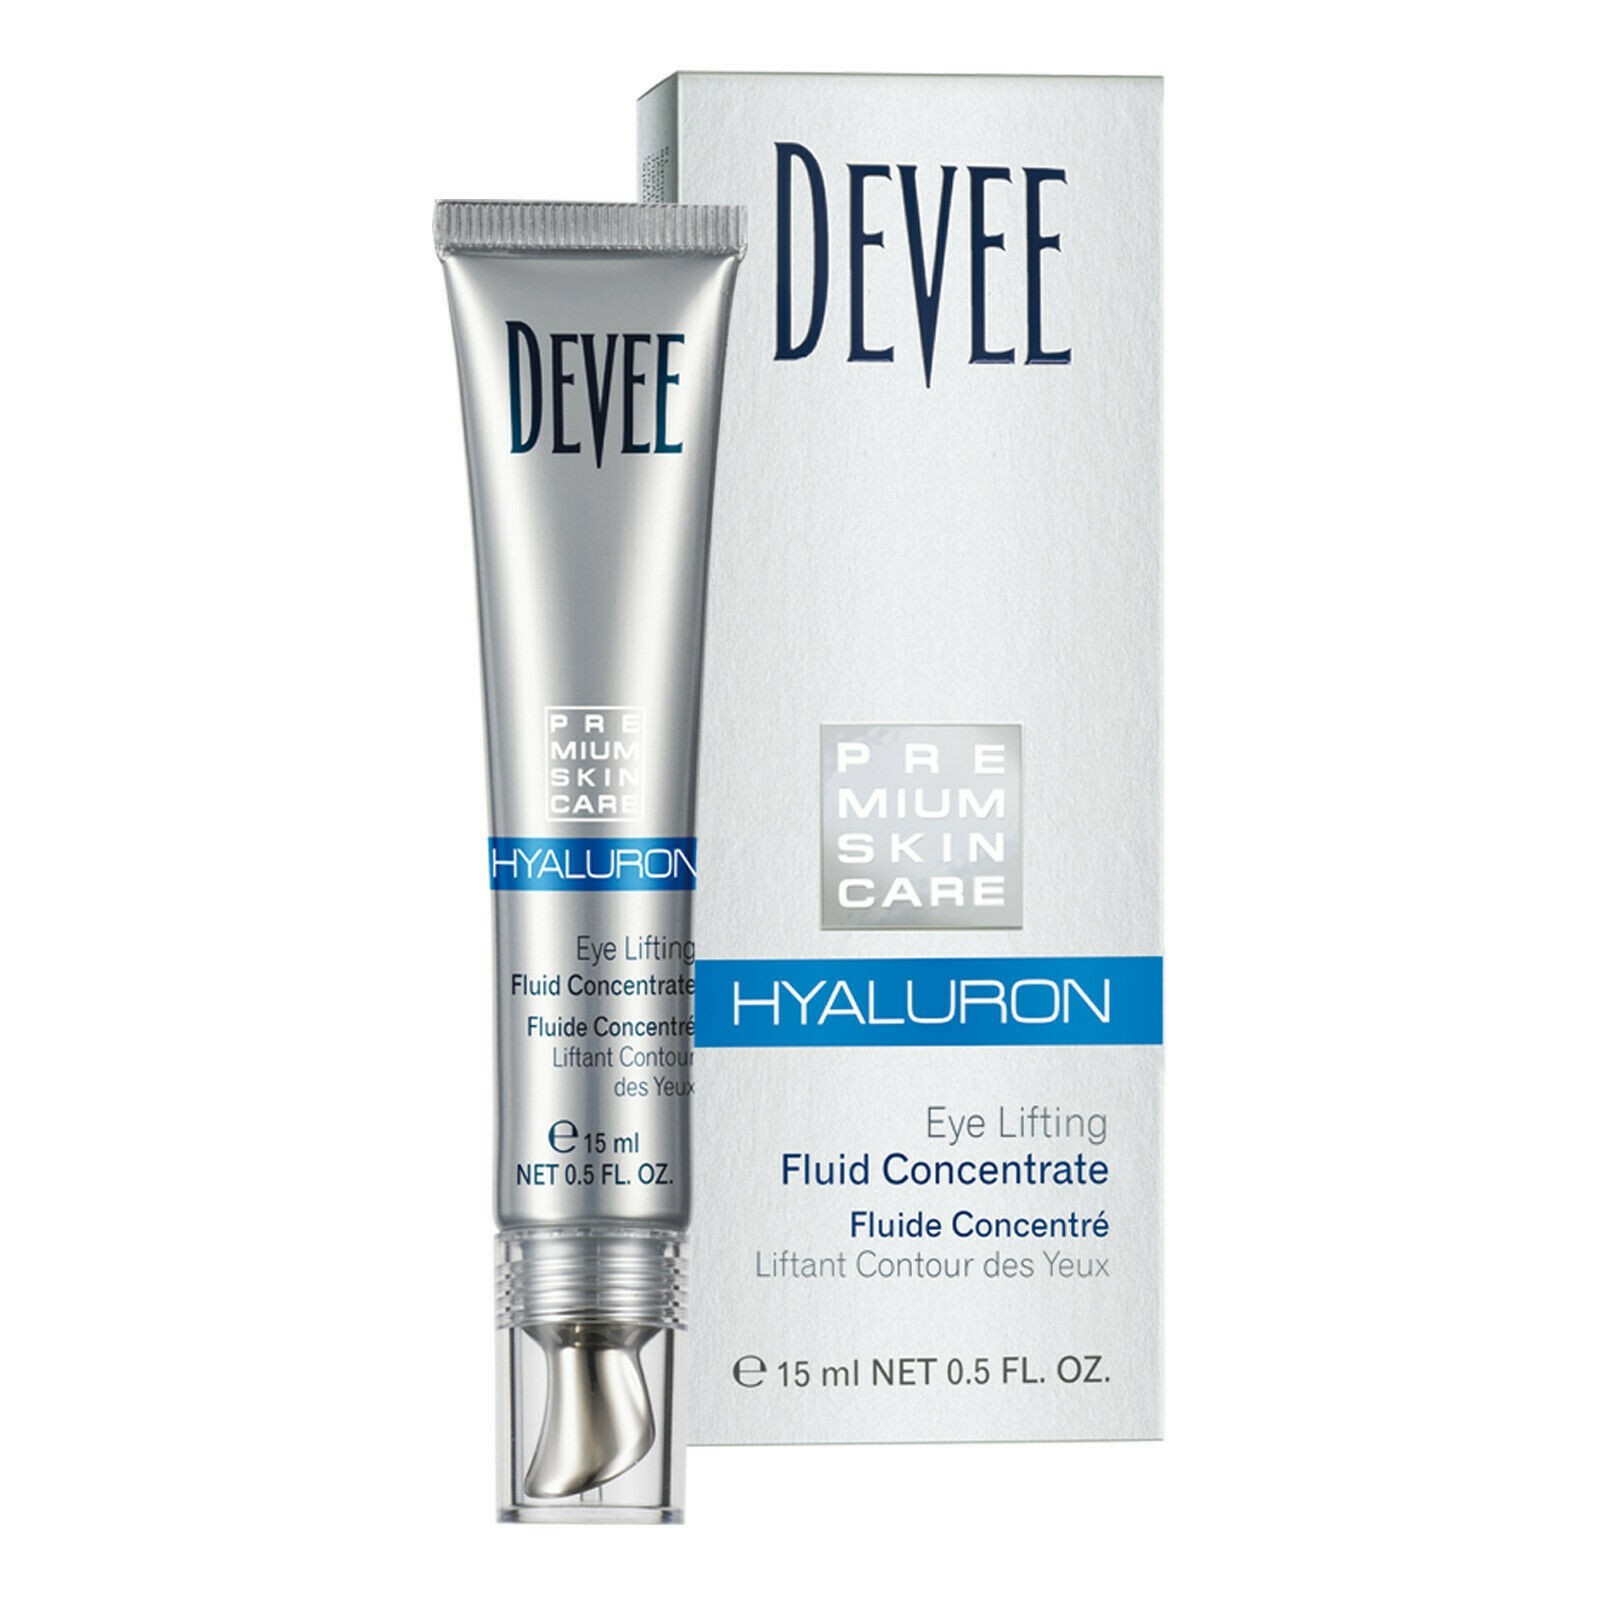 devee-hyaluron-eye-lifting-fluid-concentrate-15-ml